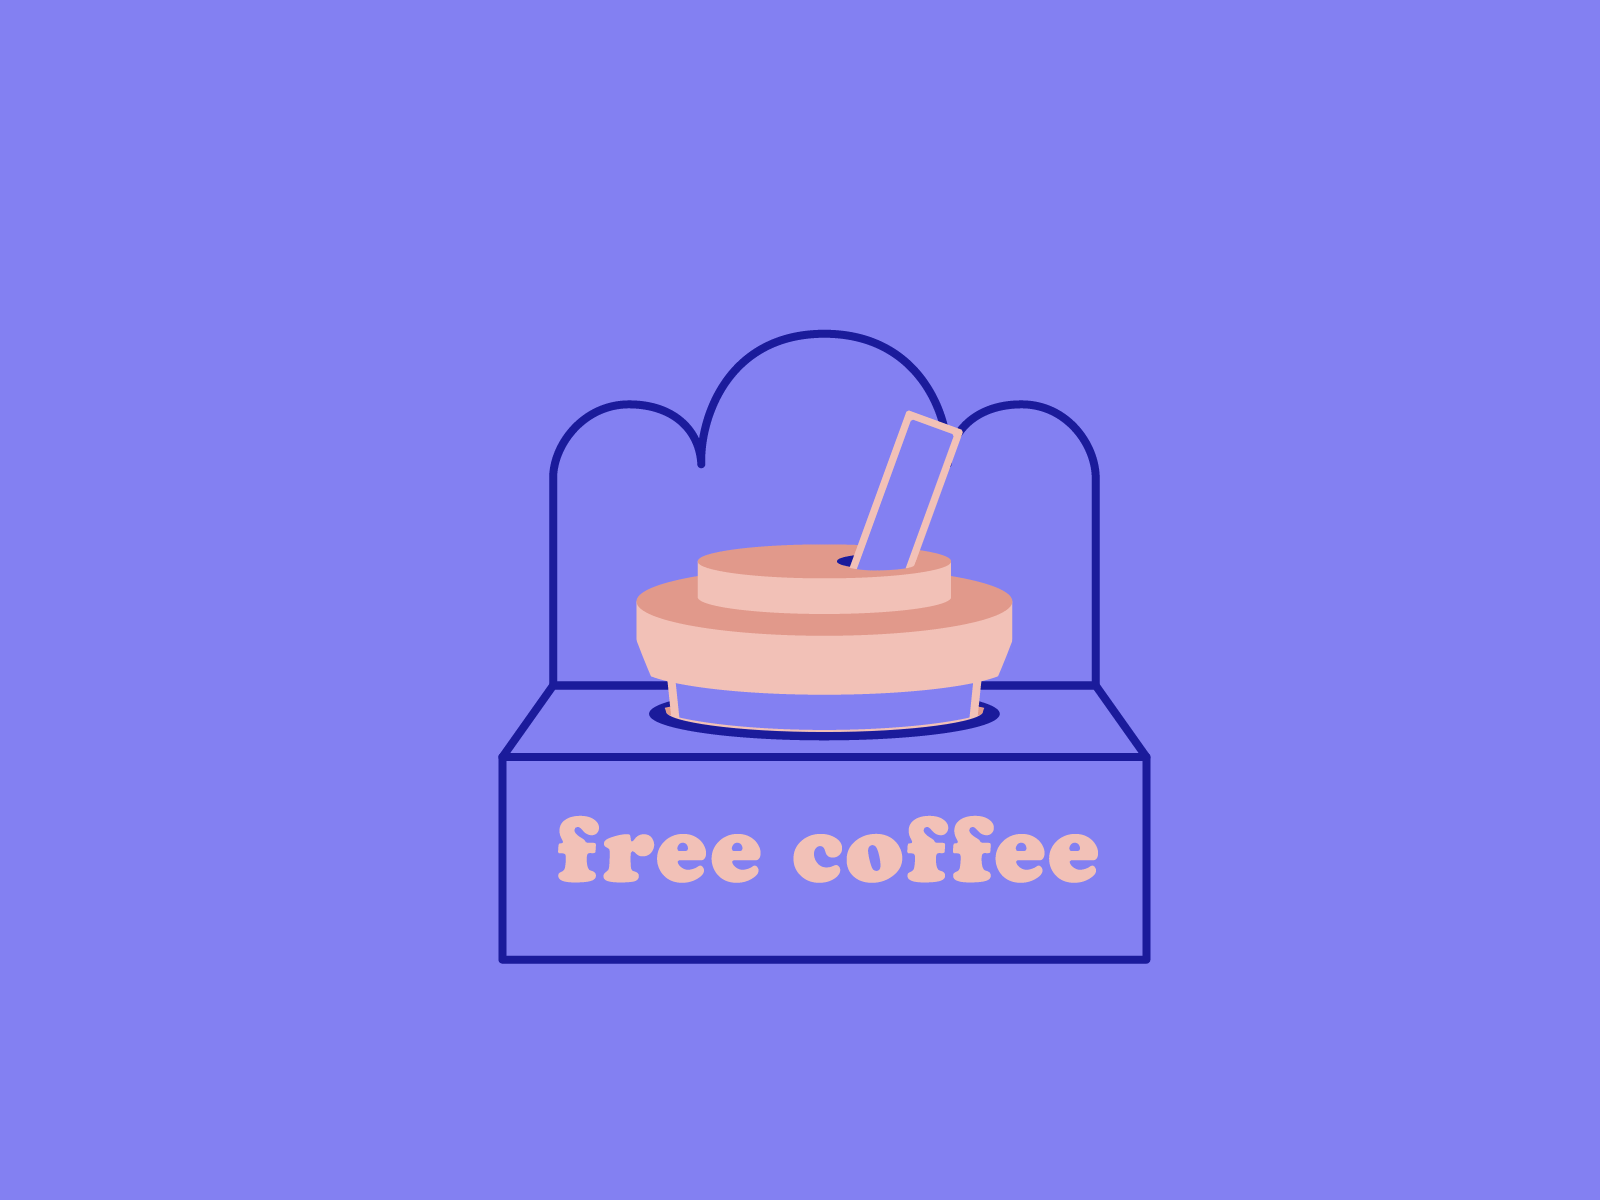 Take the coffee or else the Coffee will come itself🎃 30dayschallenge 30daysofdesign adobe illustrator after effects animation animation2d character design coffee cup cute flat illustration mograph motion graphics